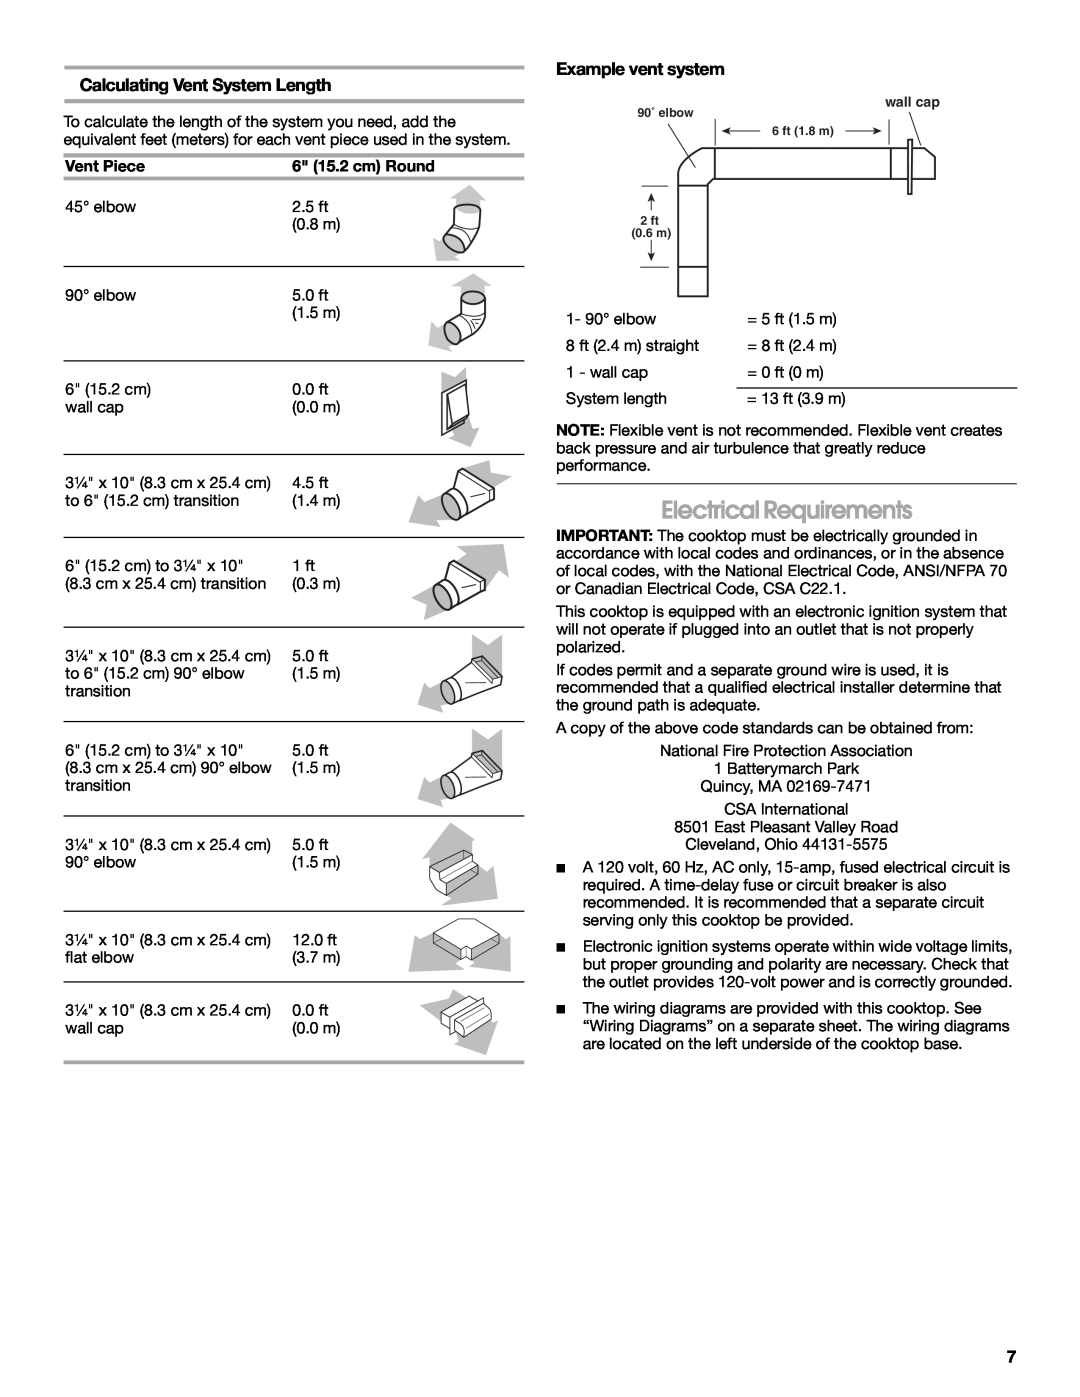 Jenn-Air W10526080A Electrical Requirements, Calculating Vent System Length, Example vent system, Vent Piece 